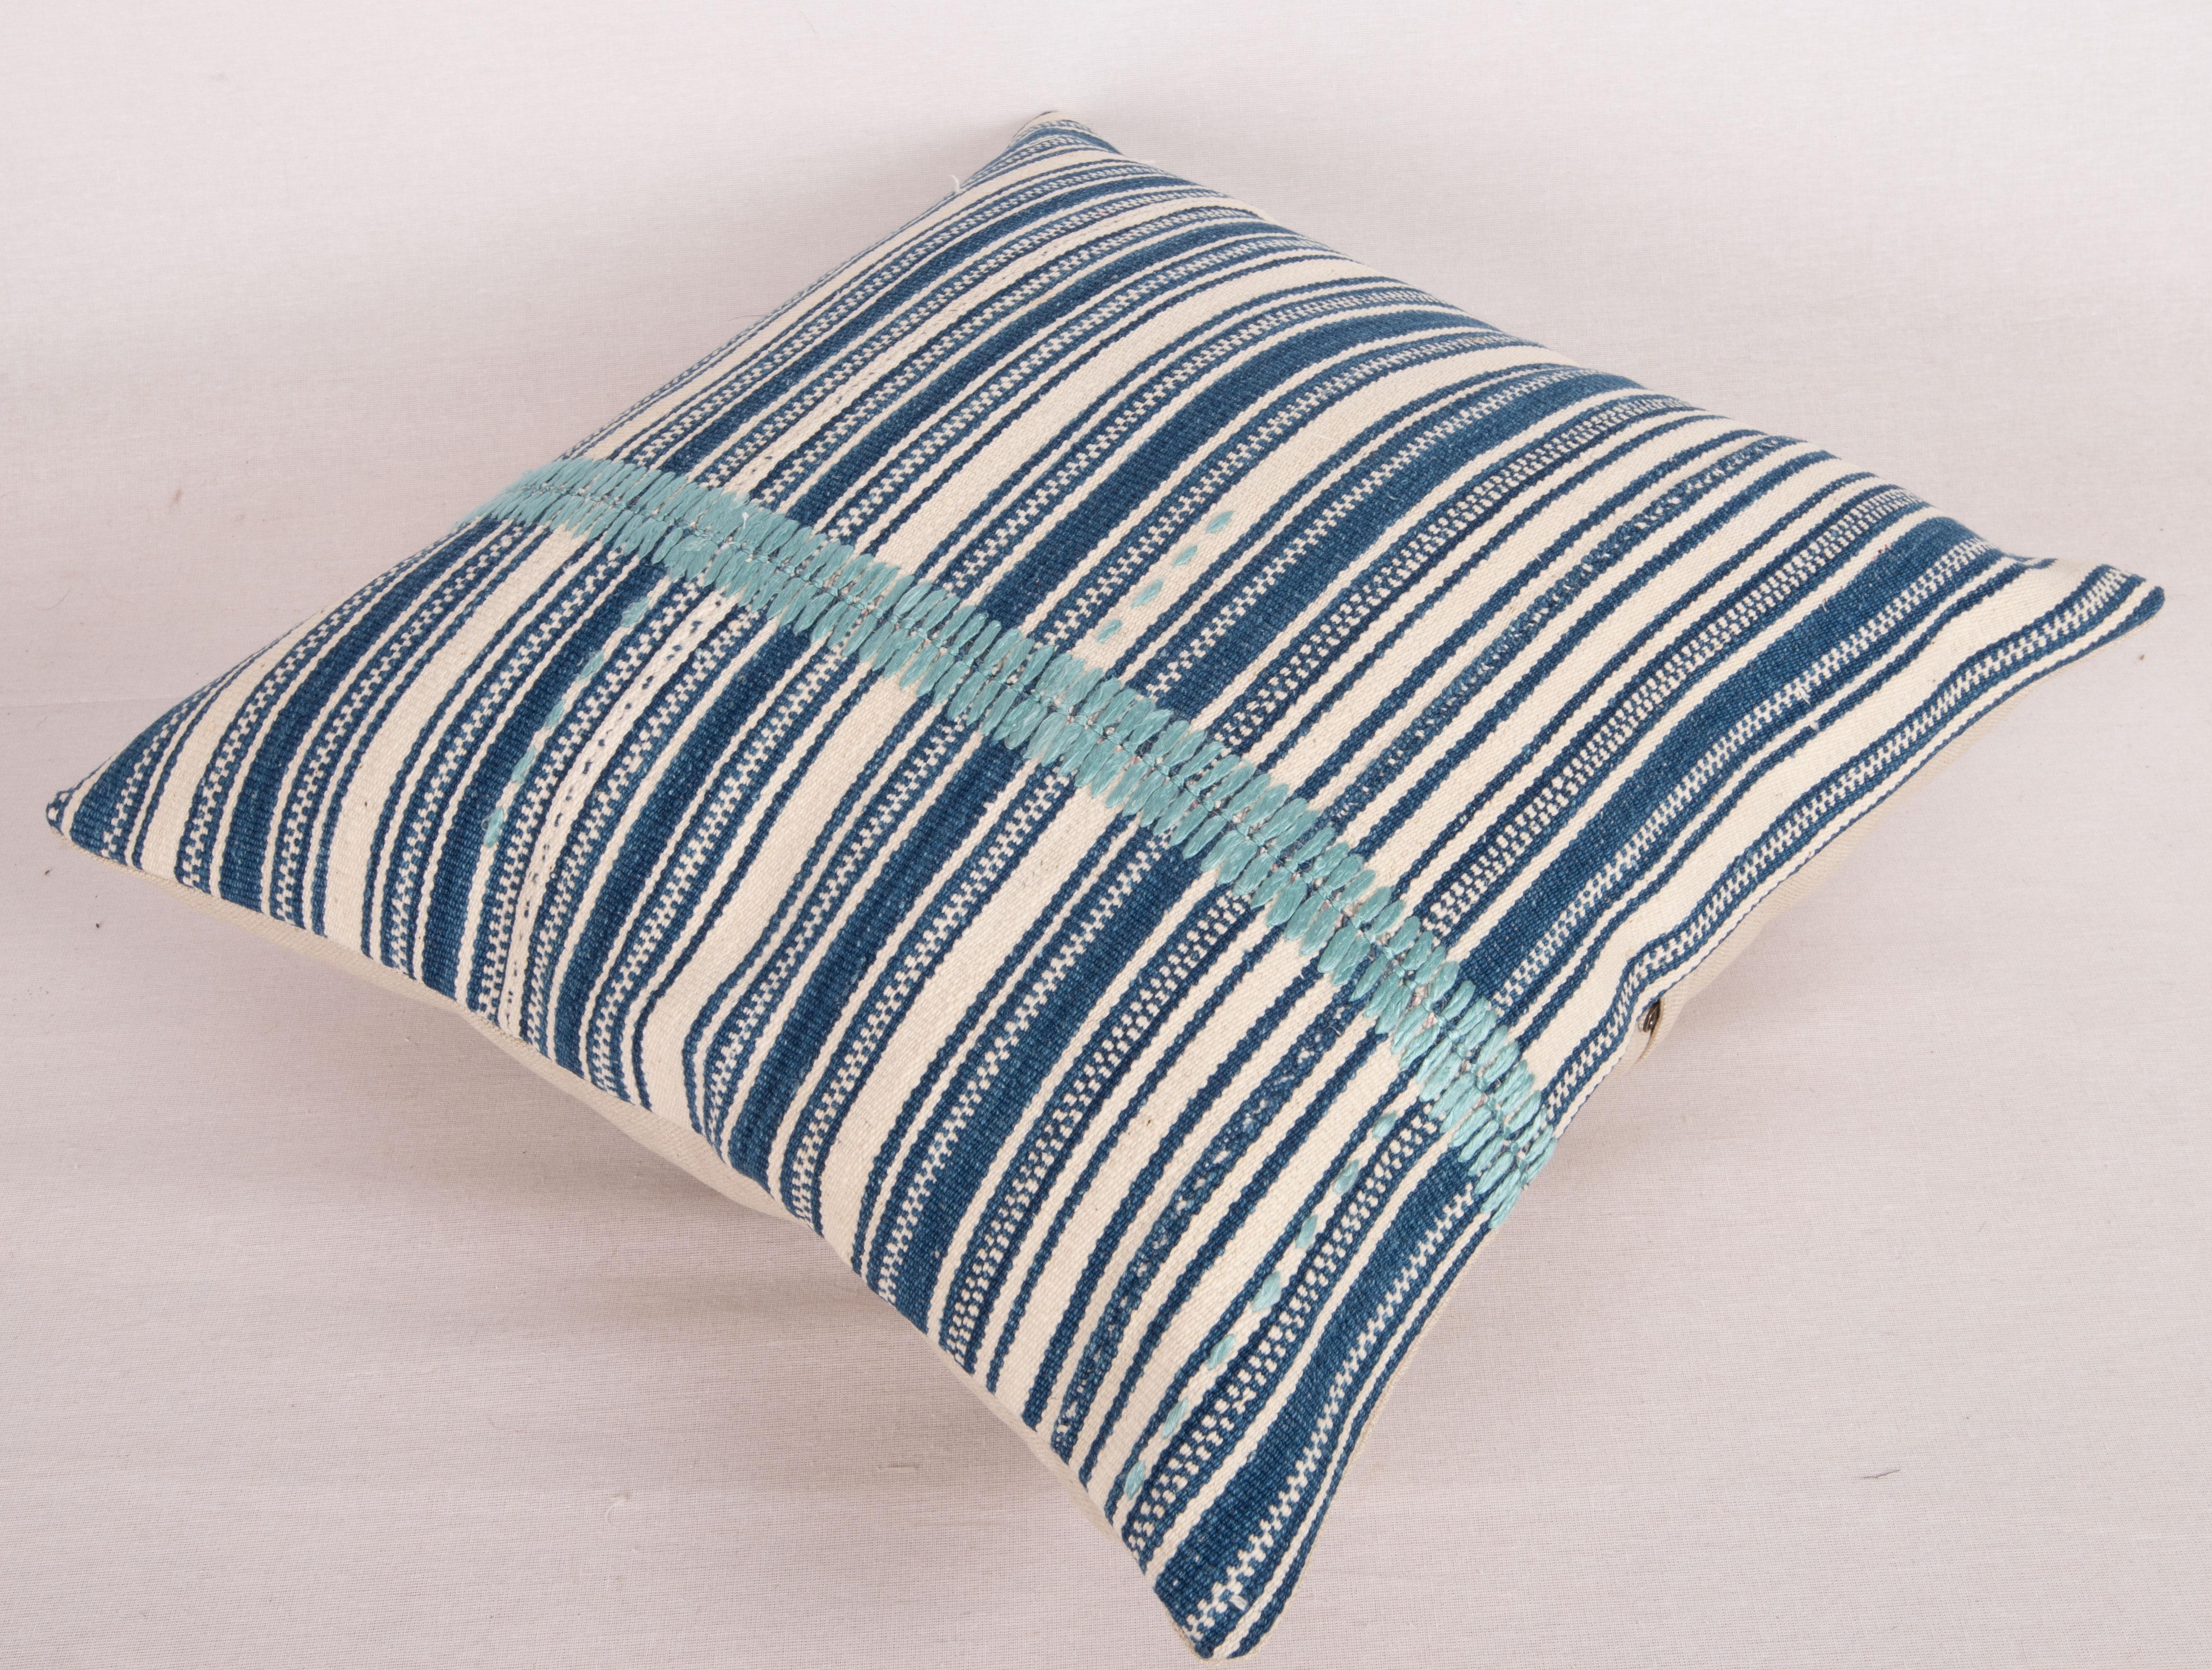 Cotton Indigo Stripped Pillow Cover, Made from a Mid 20th C. Turkish Kilim